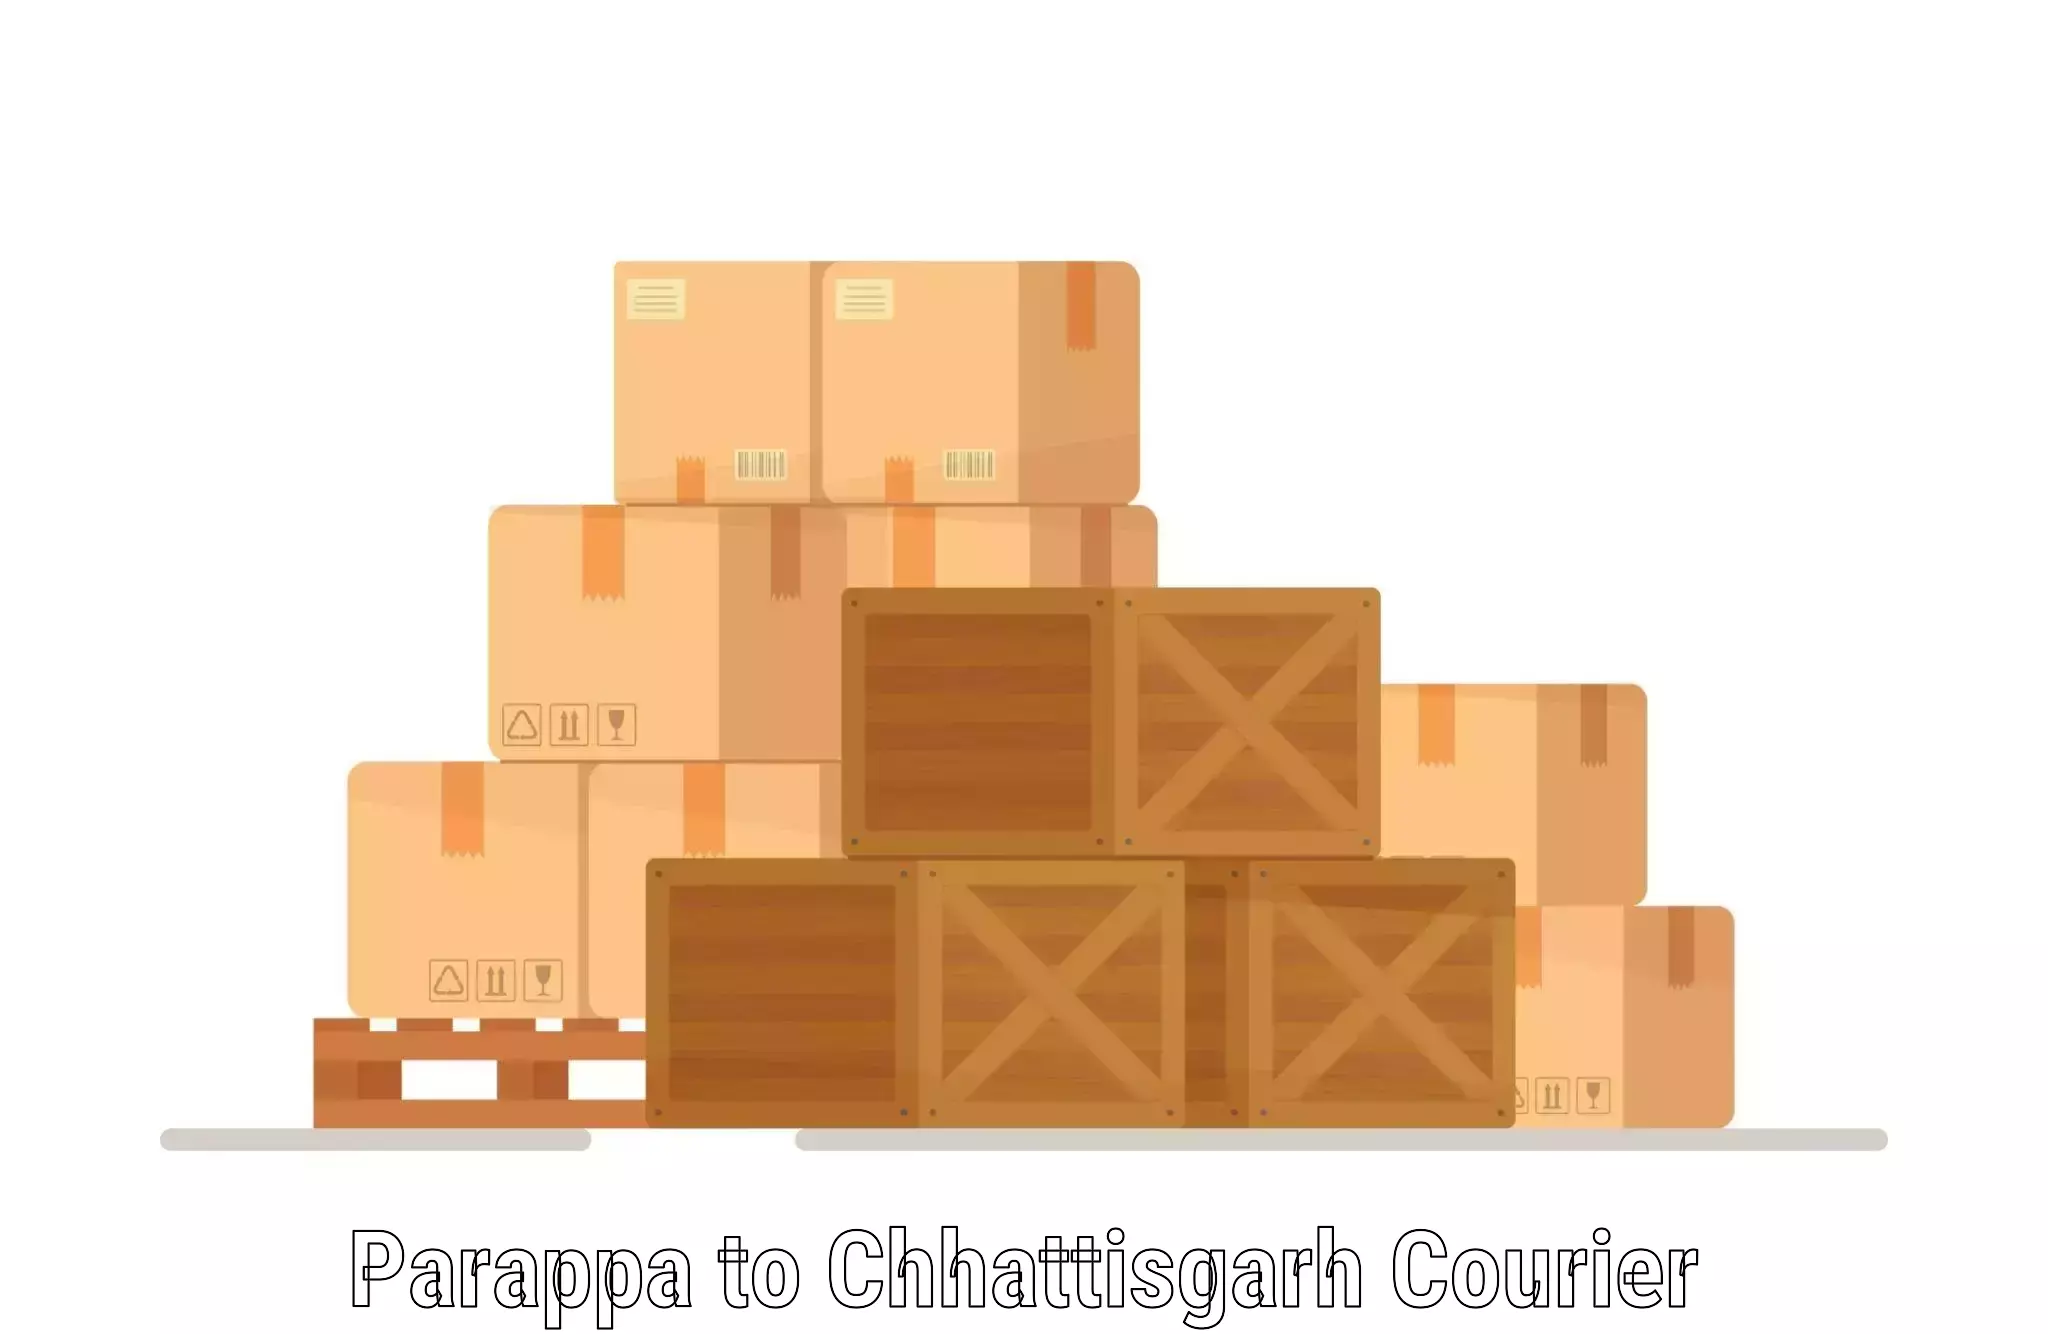 Package tracking in Parappa to Lailunga